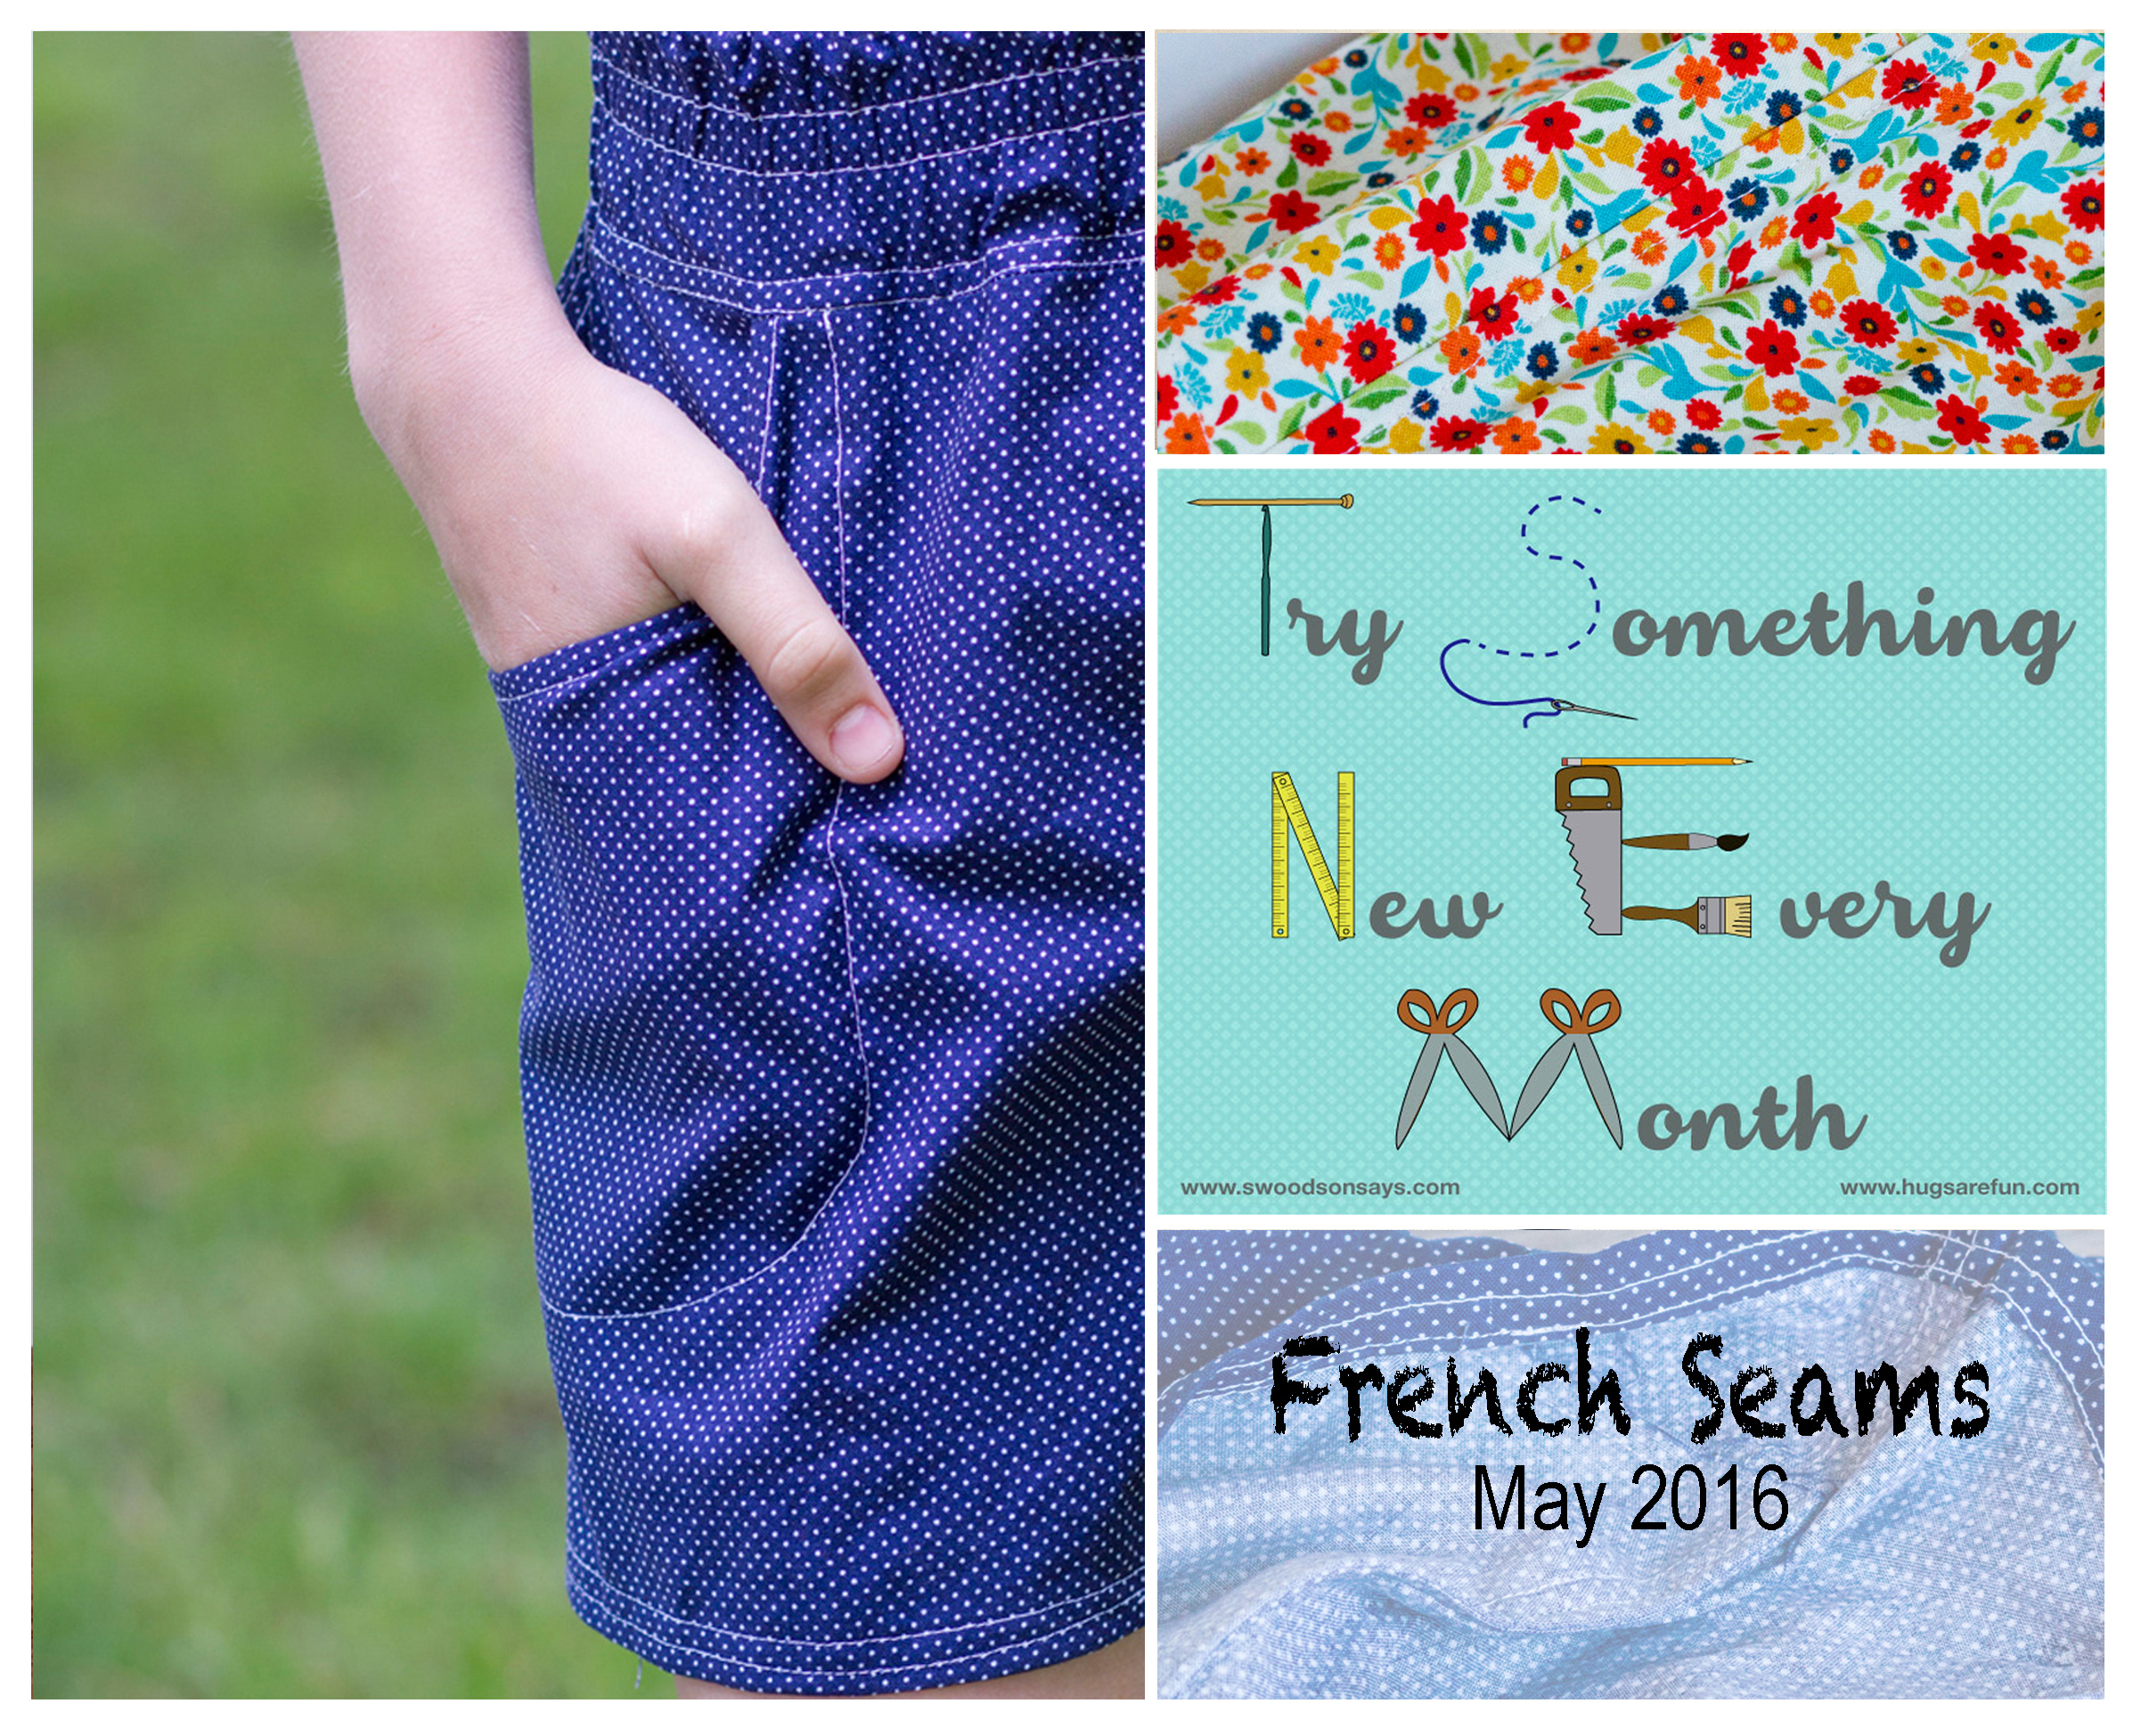 French Seams – May's Try Something New Every Month Project